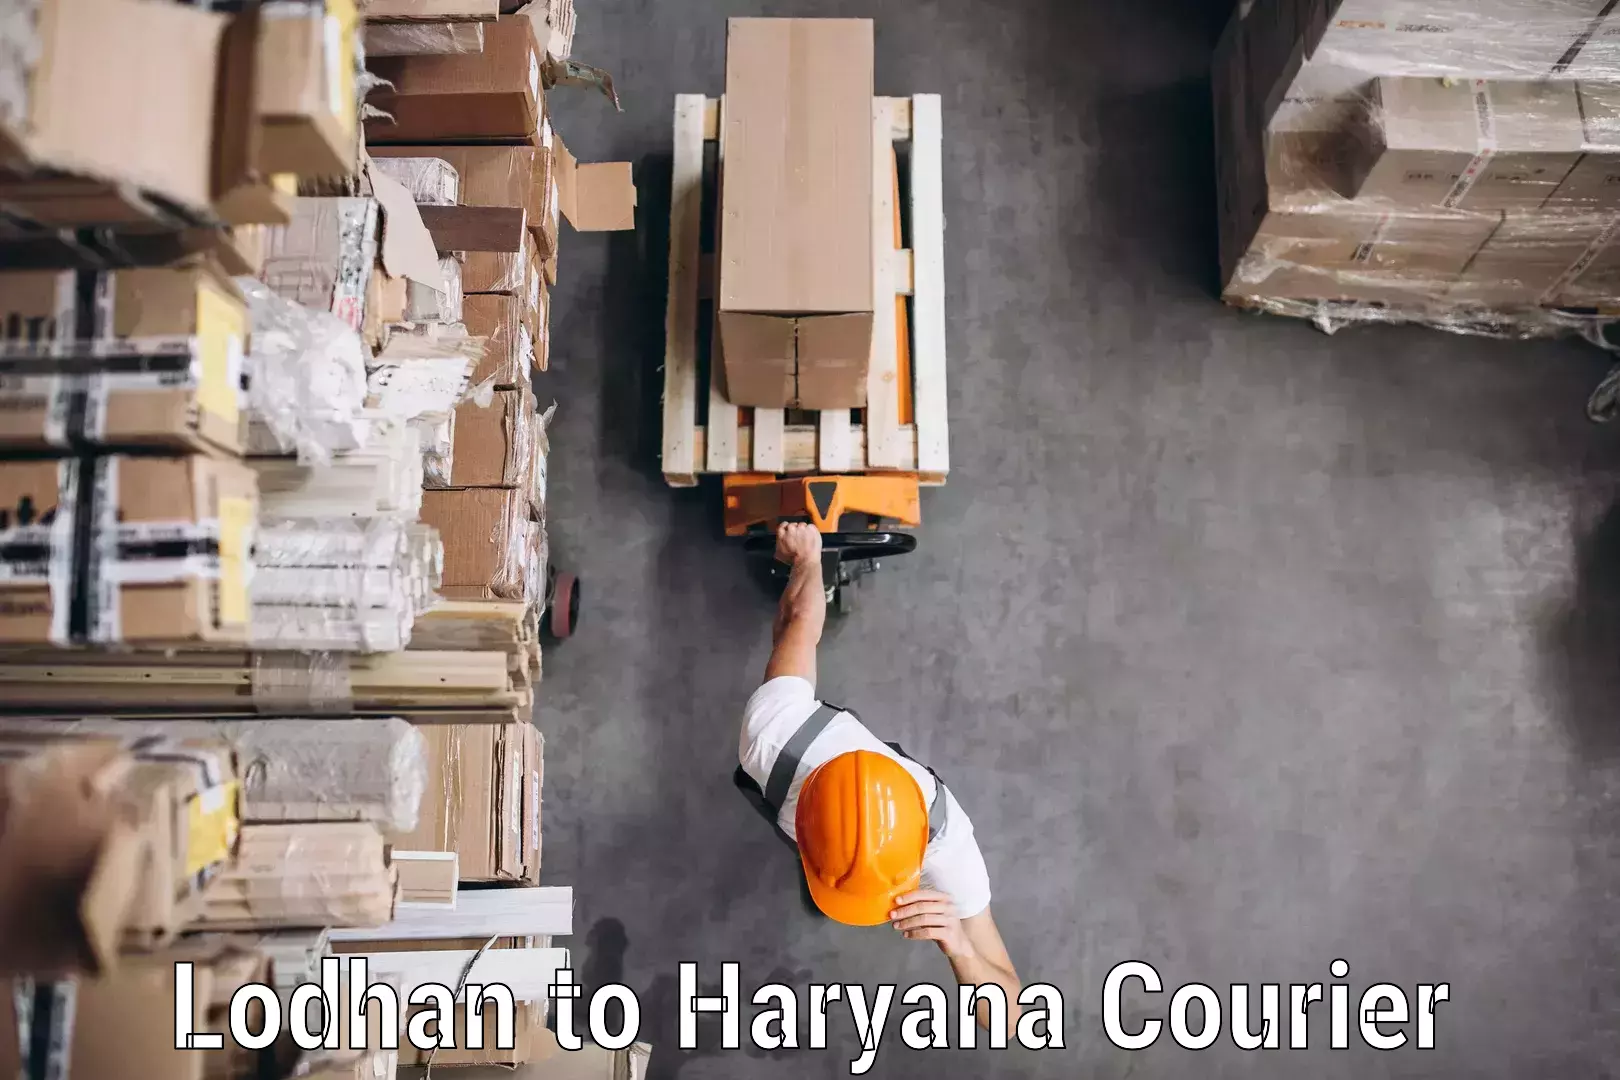 Advanced courier platforms Lodhan to Haryana